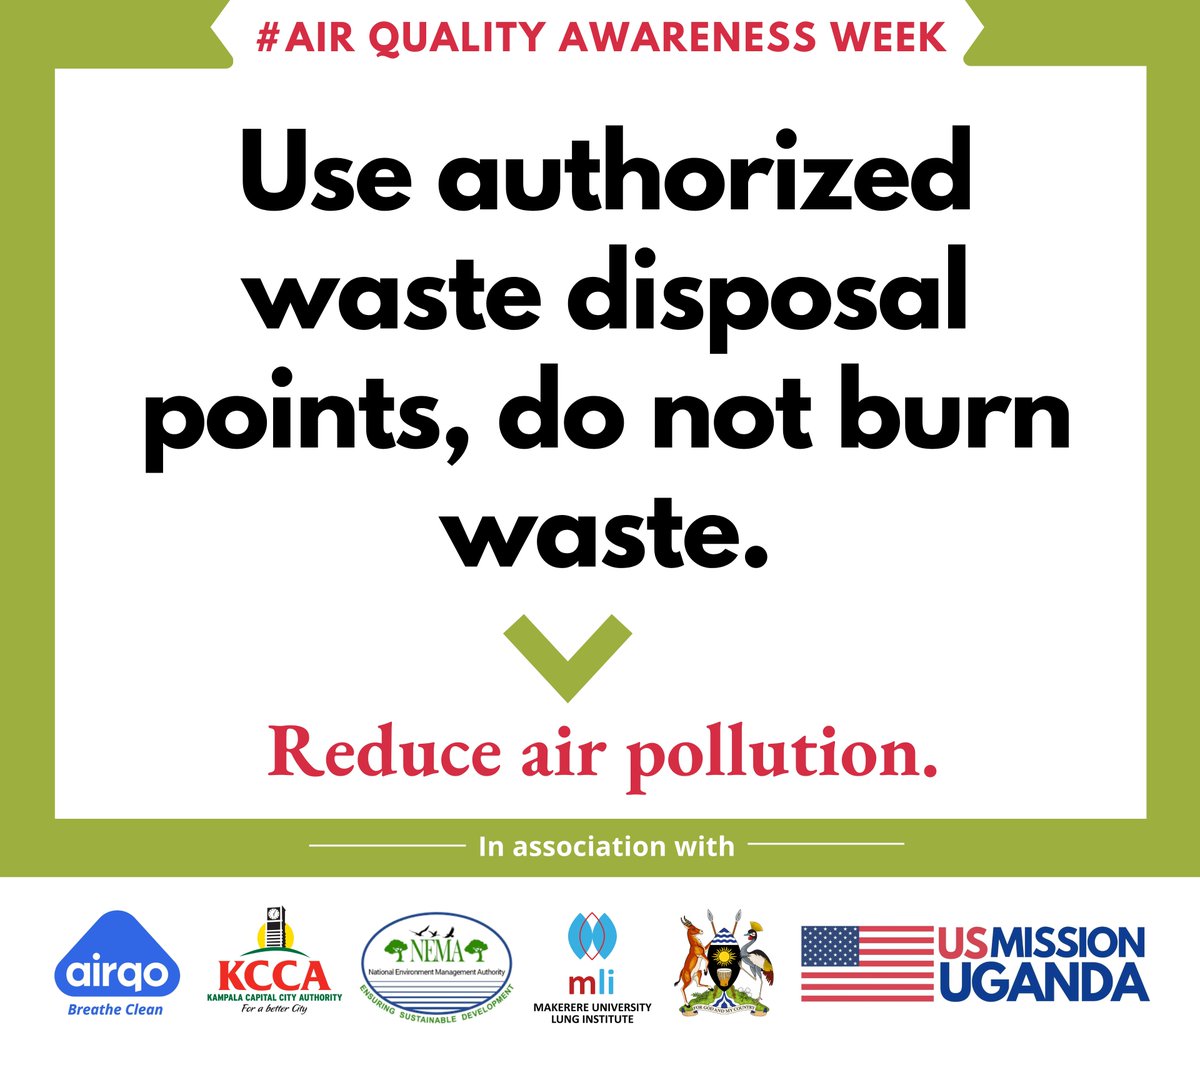 Kickstart the #AQAW24 week by making a positive impact in our communities. Take a pledge to responsibly dispose of waste at central disposal points and say no to burning. Small steps today can lead to big changes for our environment. Together, we can make a difference!